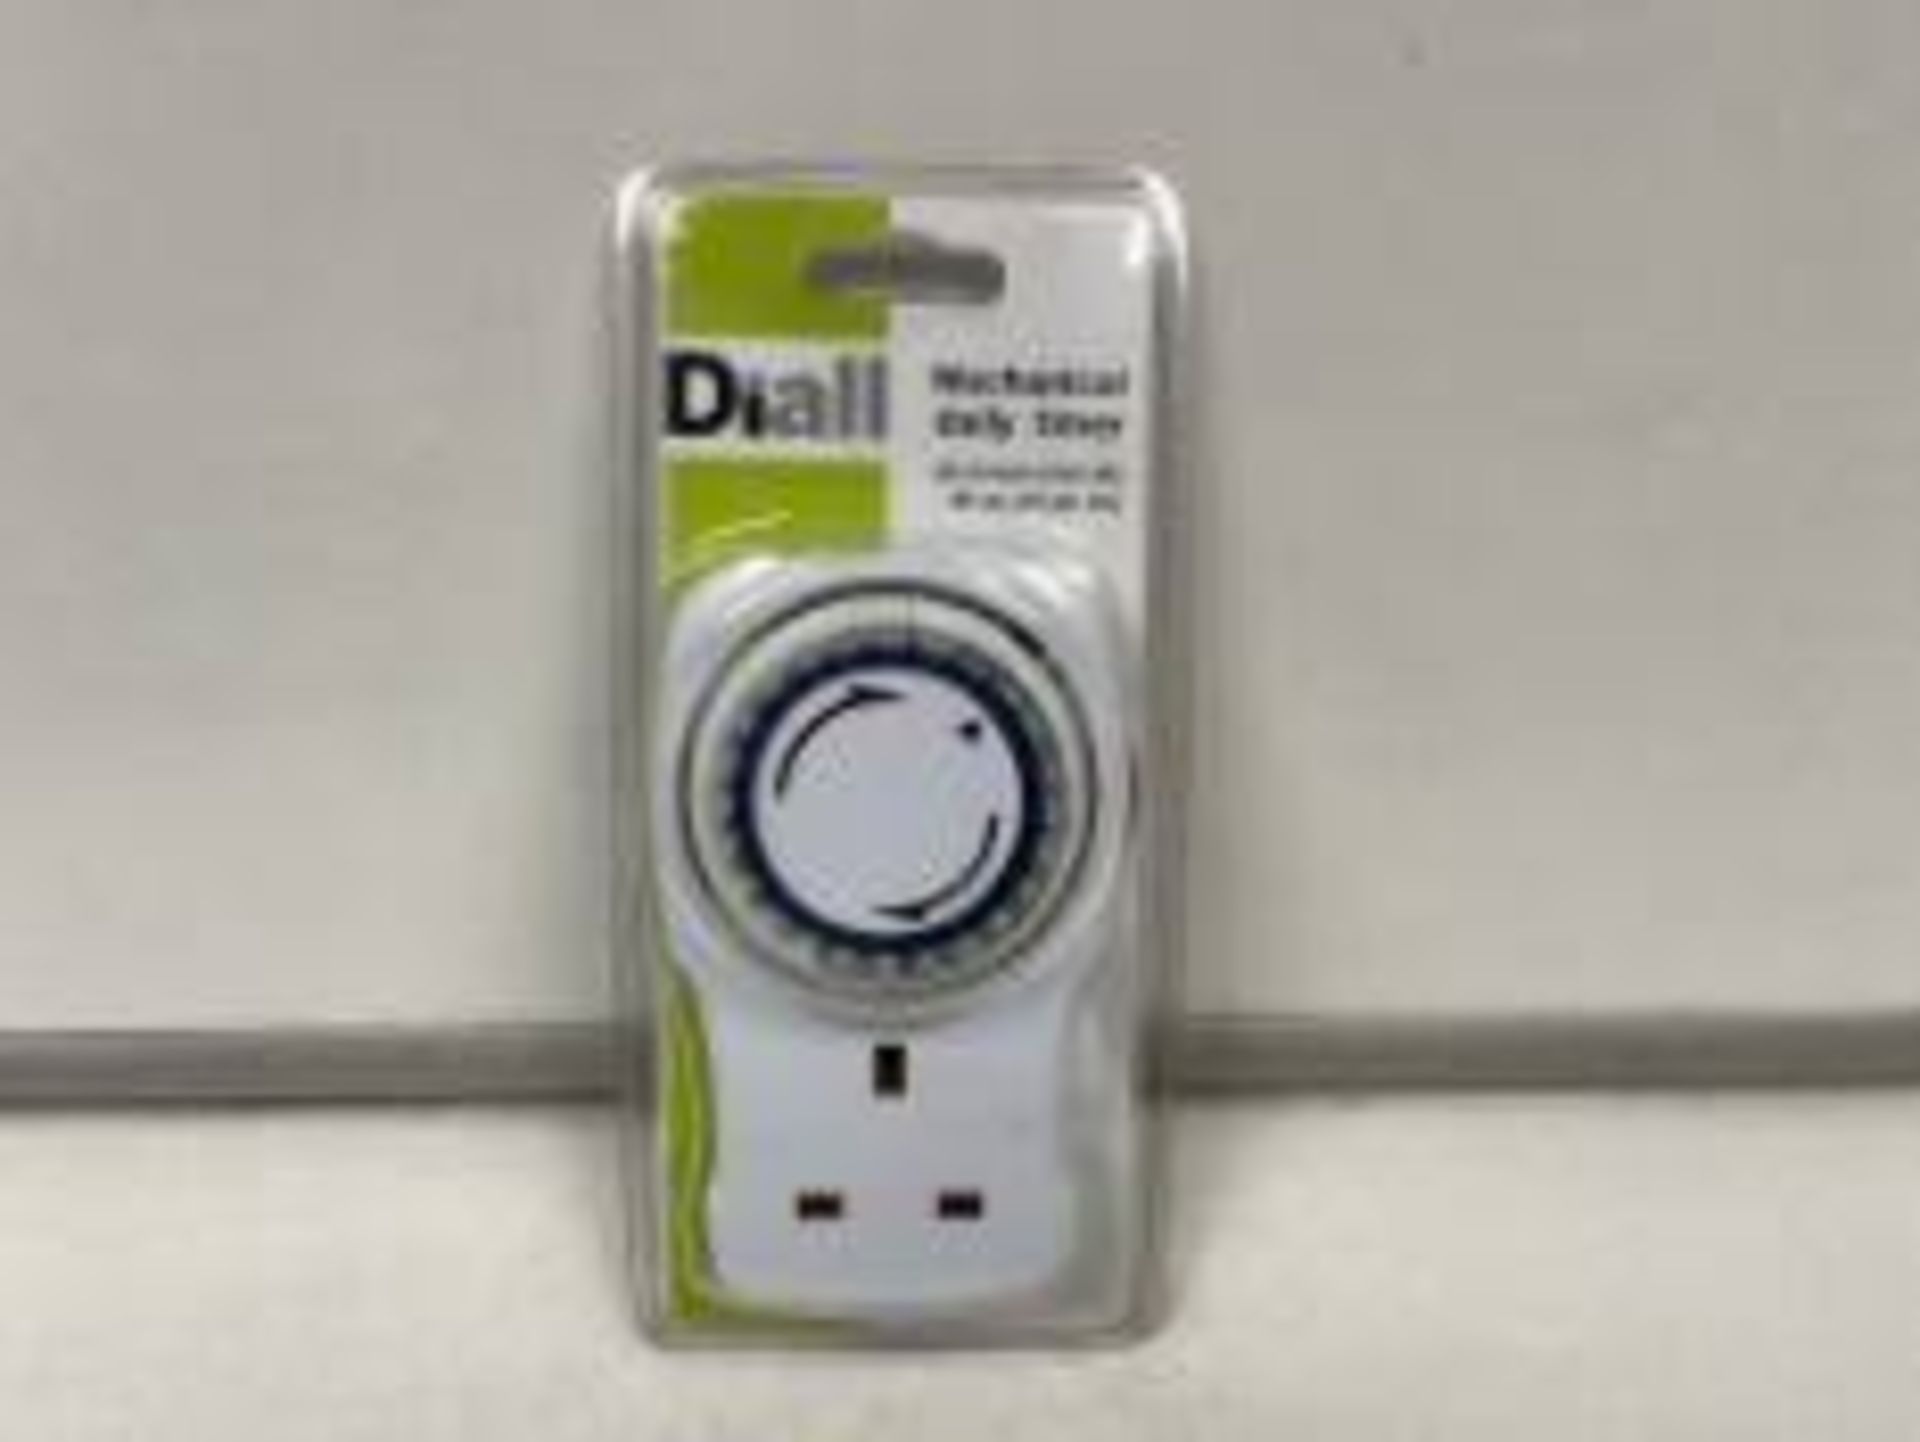 20 X NEW PACKAGED DIALL COMPACT MECHANICAL DAILY TIMER. 96 ON/OFF PER DAY. 15 MINUTE INTERVALS.